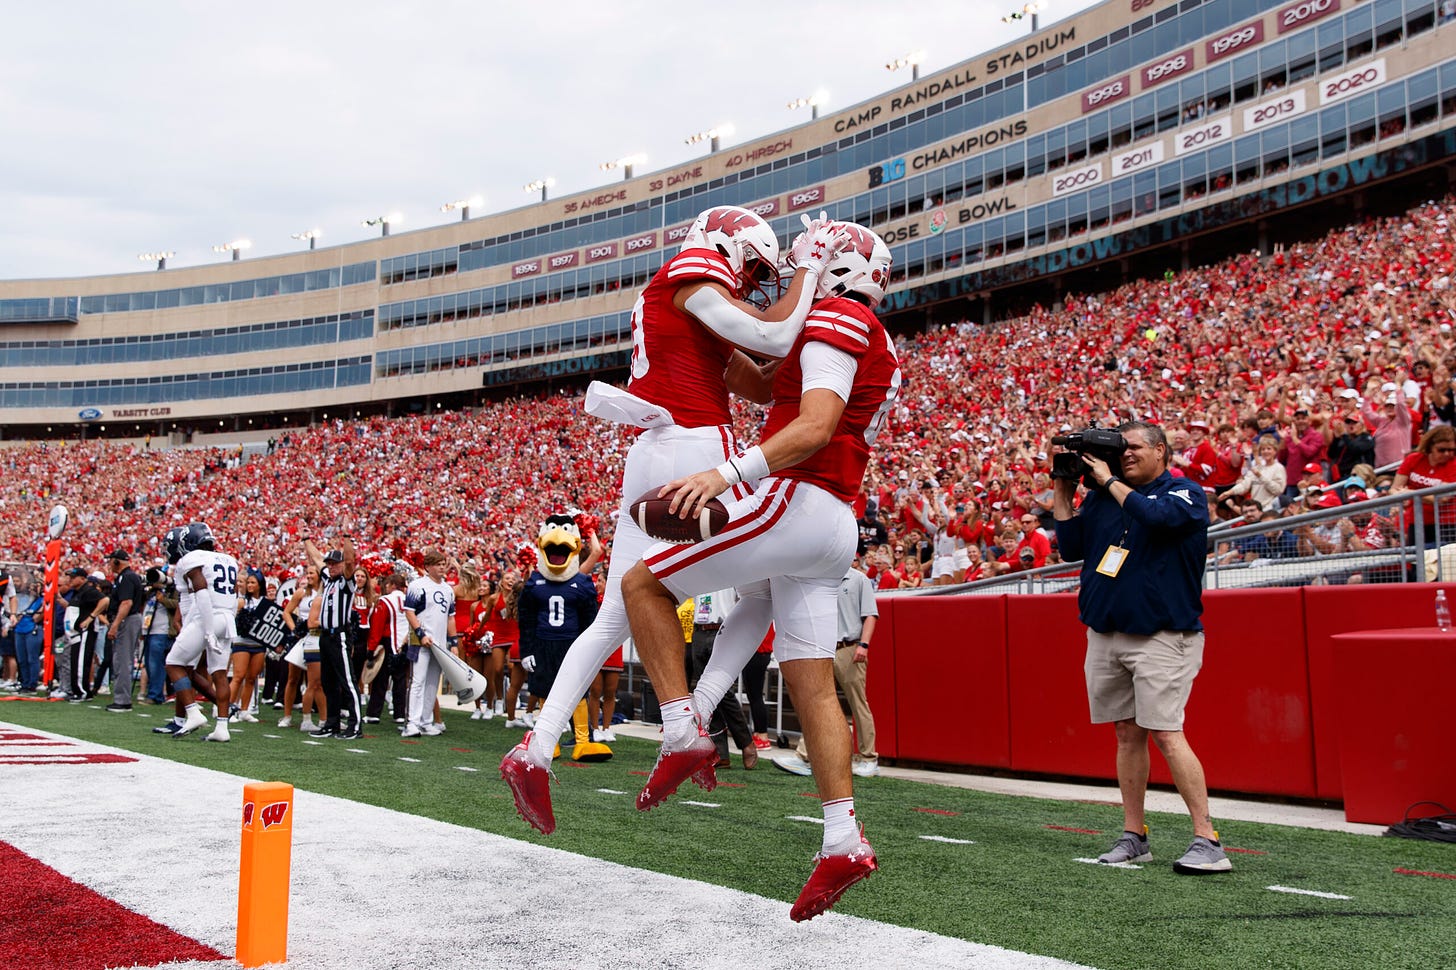 Wisconsin football players Tanner Mordecai and Chimere Dike celebrate a touchdown.